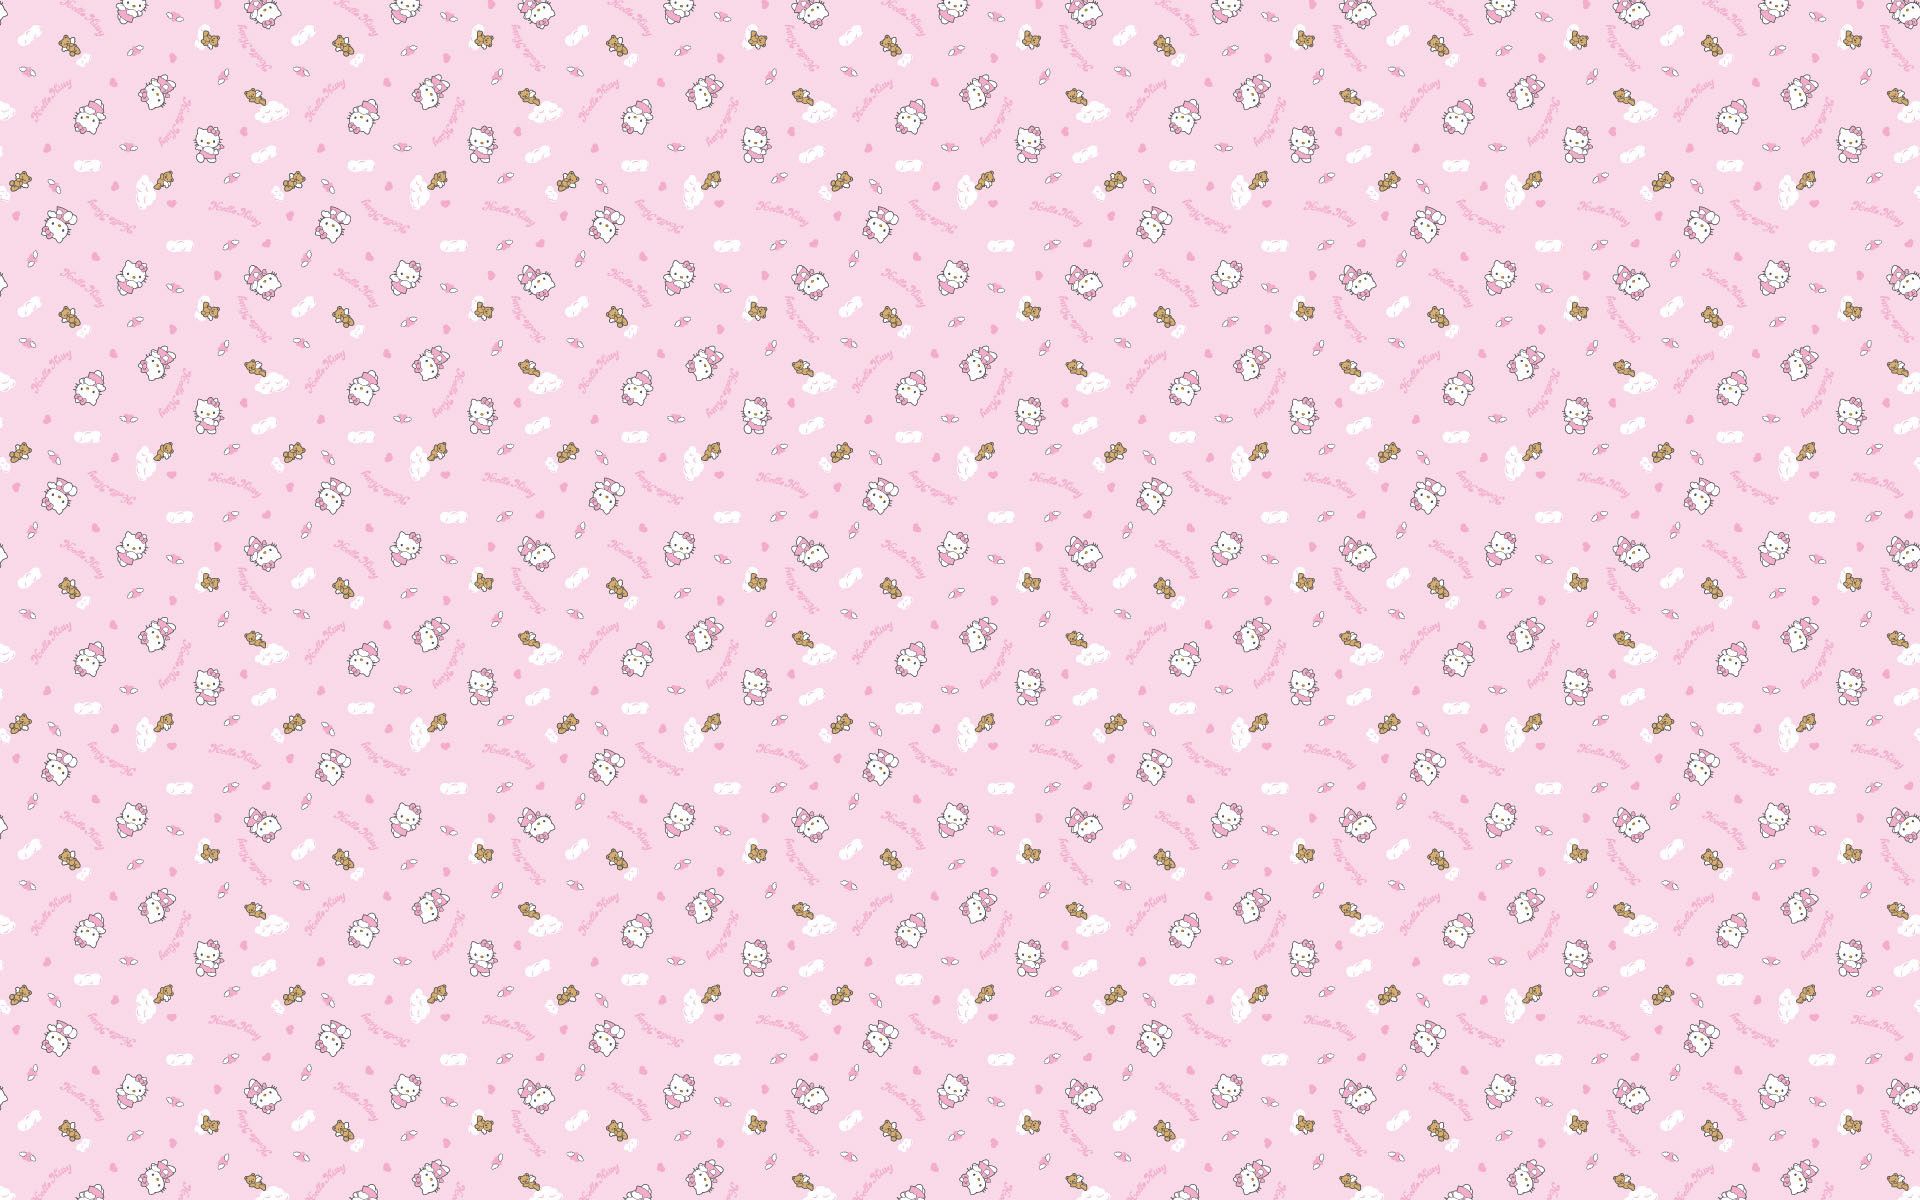 Download Baground Hello Kitty Pink Wallpaper 1920x1200 Full HD